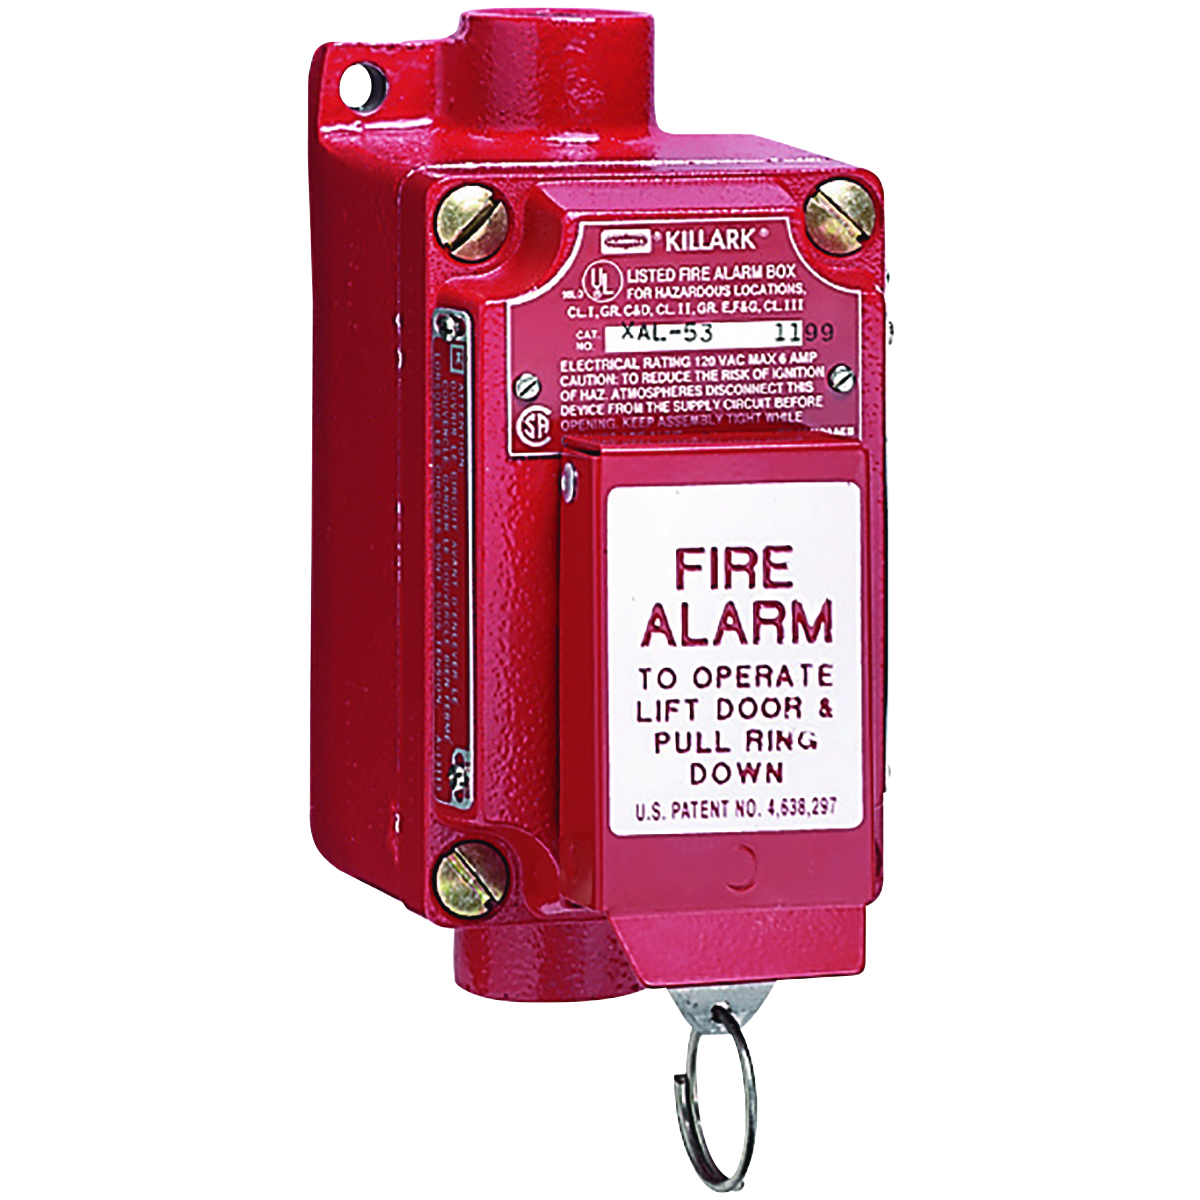 XAL SERIES - ALUMINUM FEED-THRU FIRE ALARM STATION WITH PULL-RINGACTIVATION - HUB SIZE 3/4 INCH - 2NO/2NC CONTACT RATING